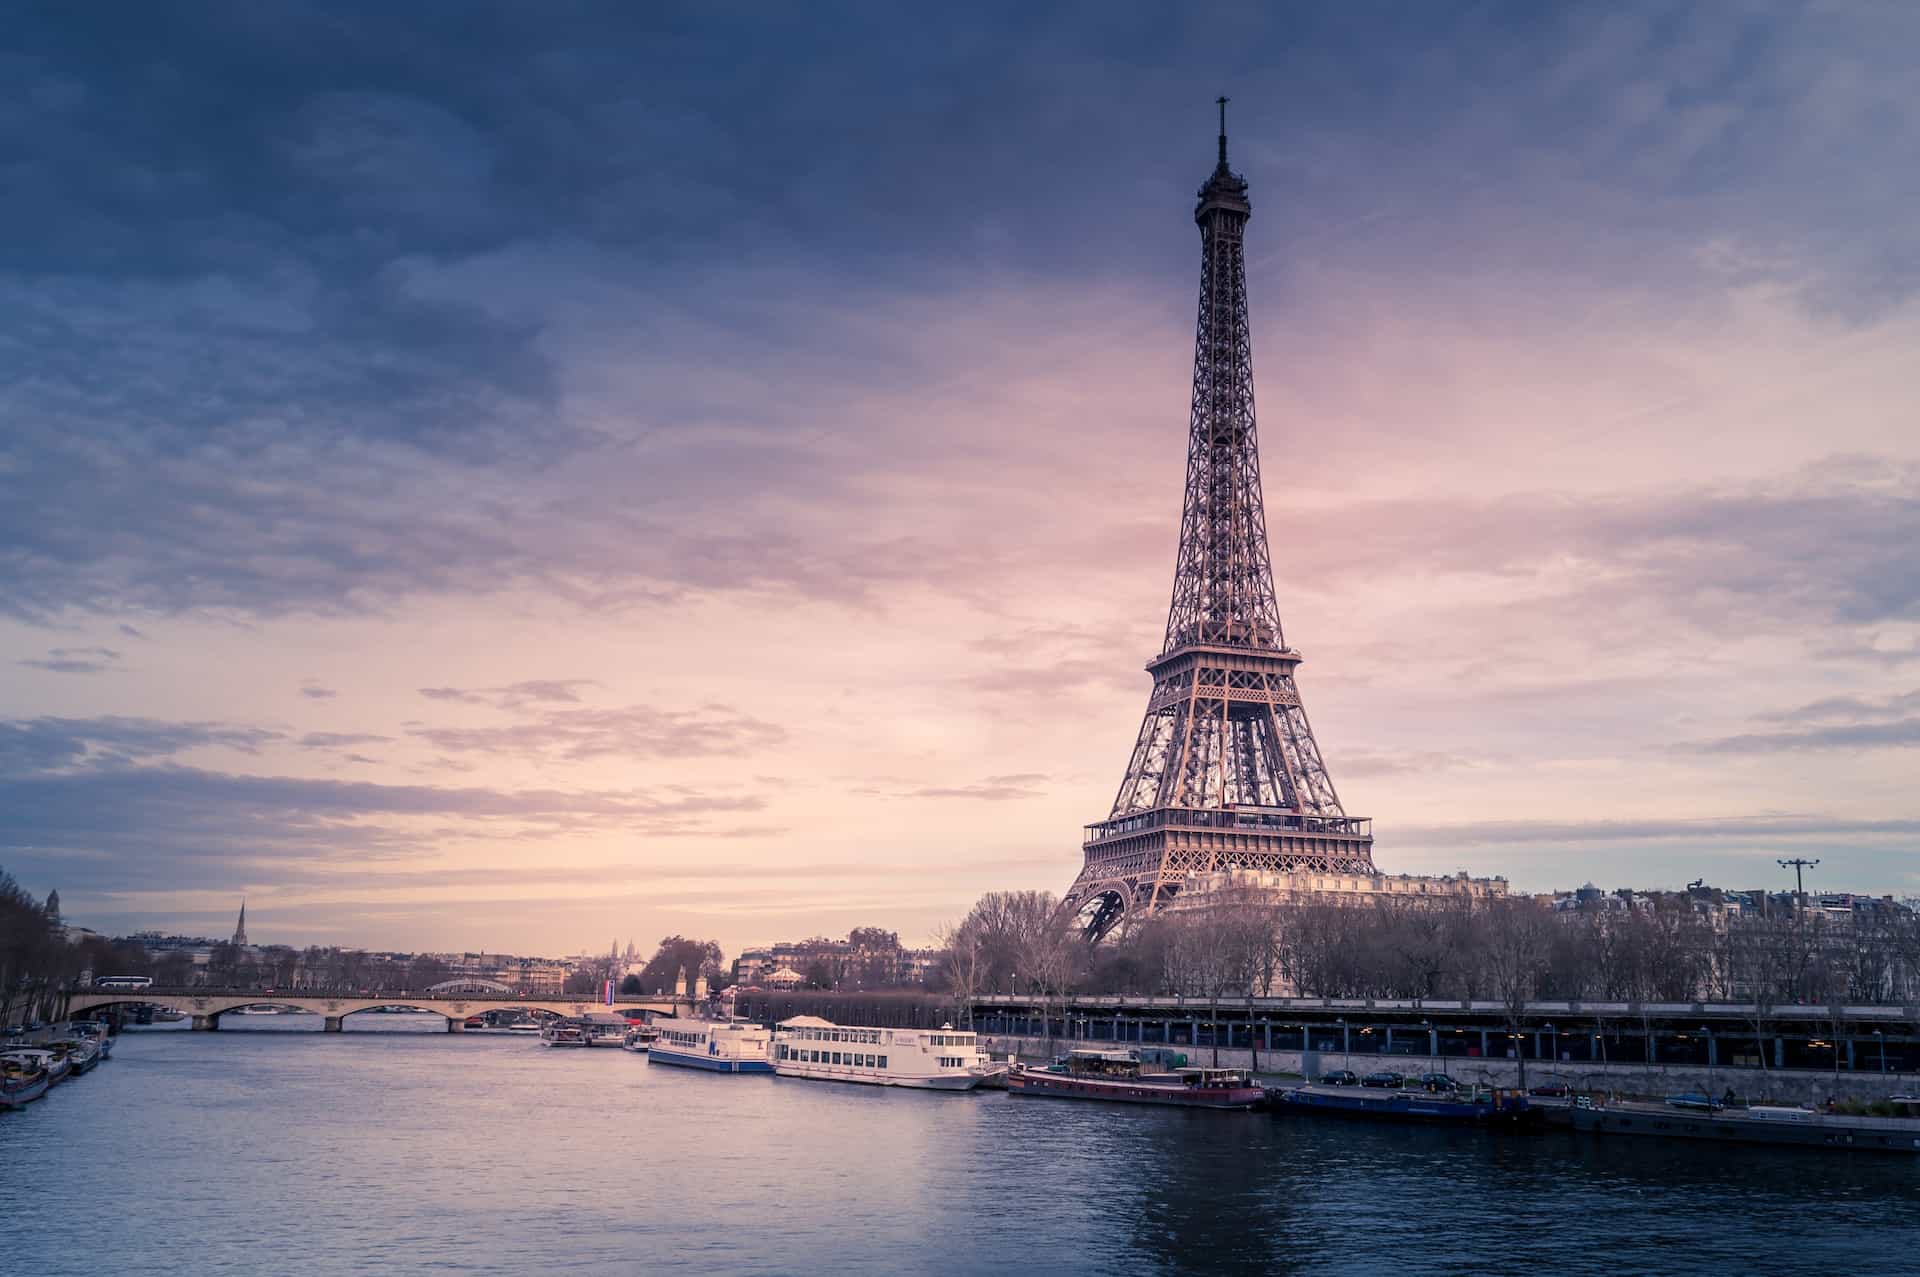 A picture of the Eiffel Tower from the banks of a river.